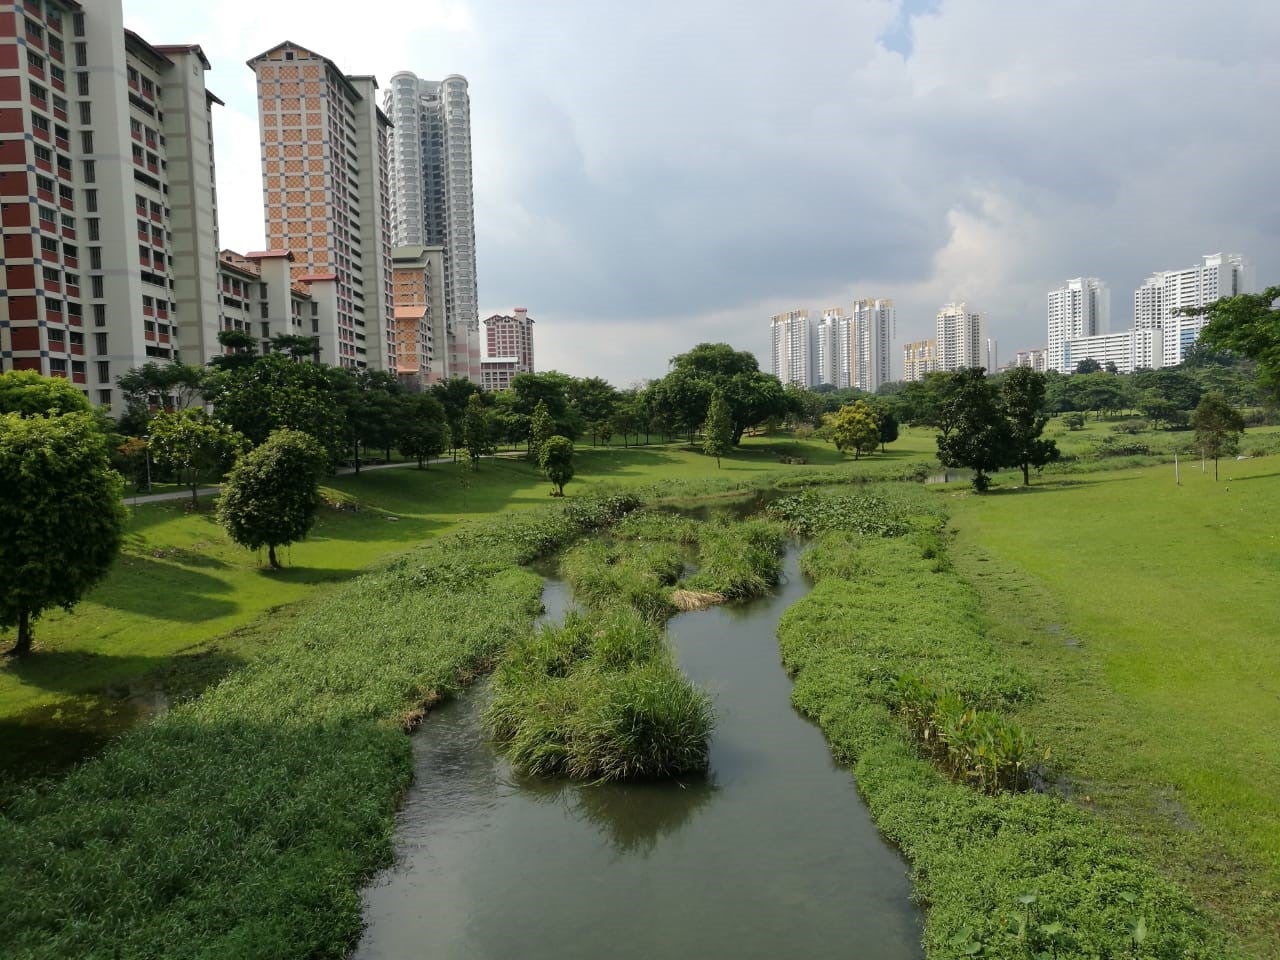 The Bishan-Ang Mo Kio Park in Singapore is a good example of a multi-purpose reservoir that transformed a concrete channel into an integrated flood risk management system with vibrant public spaces, offering recreational opportunities, children’s play spaces, green spaces, and economic opportunities for small business. Photo: Jian Vun/World Bank.